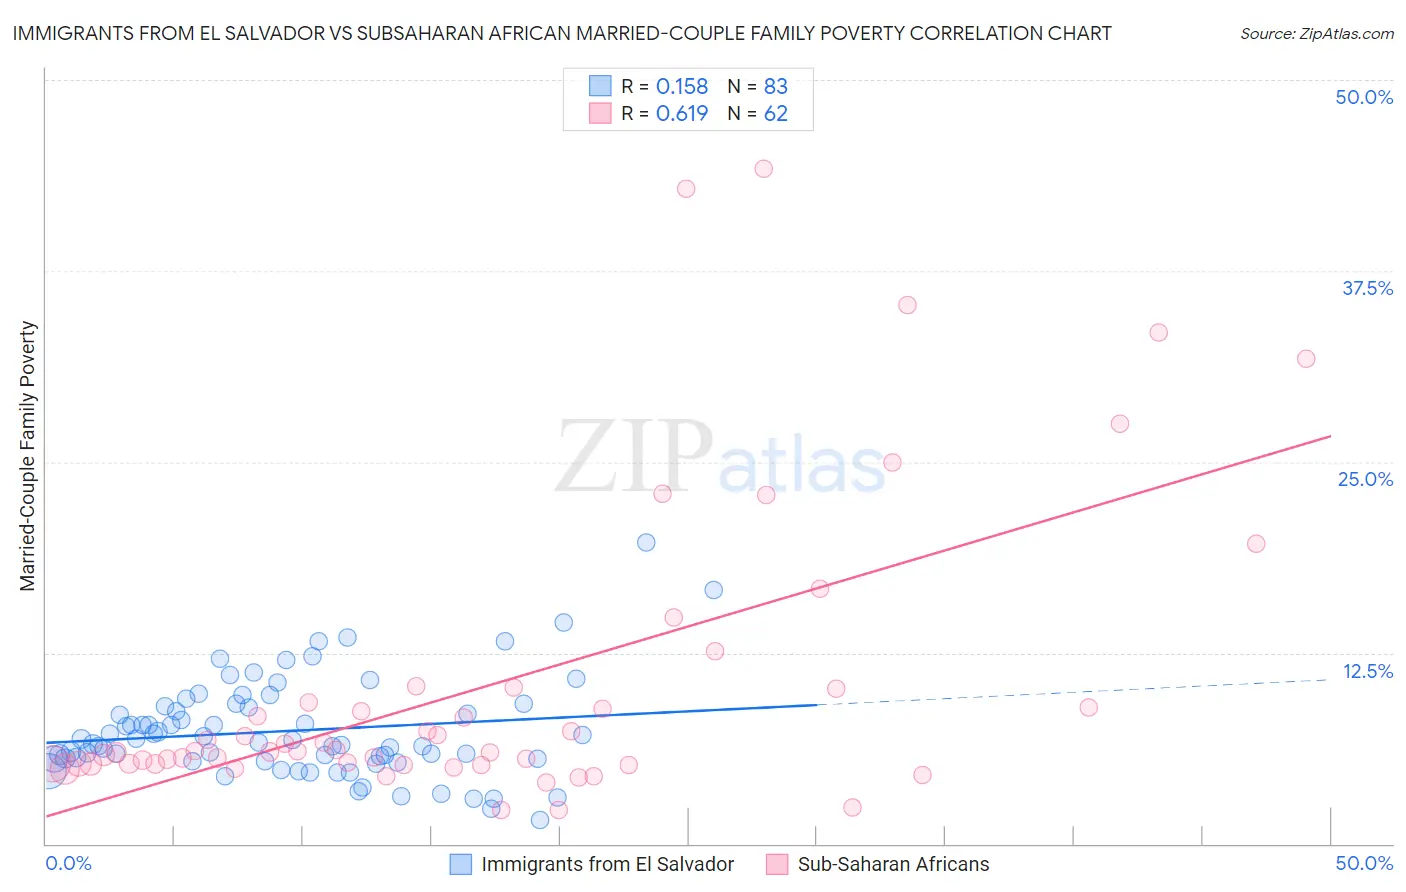 Immigrants from El Salvador vs Subsaharan African Married-Couple Family Poverty